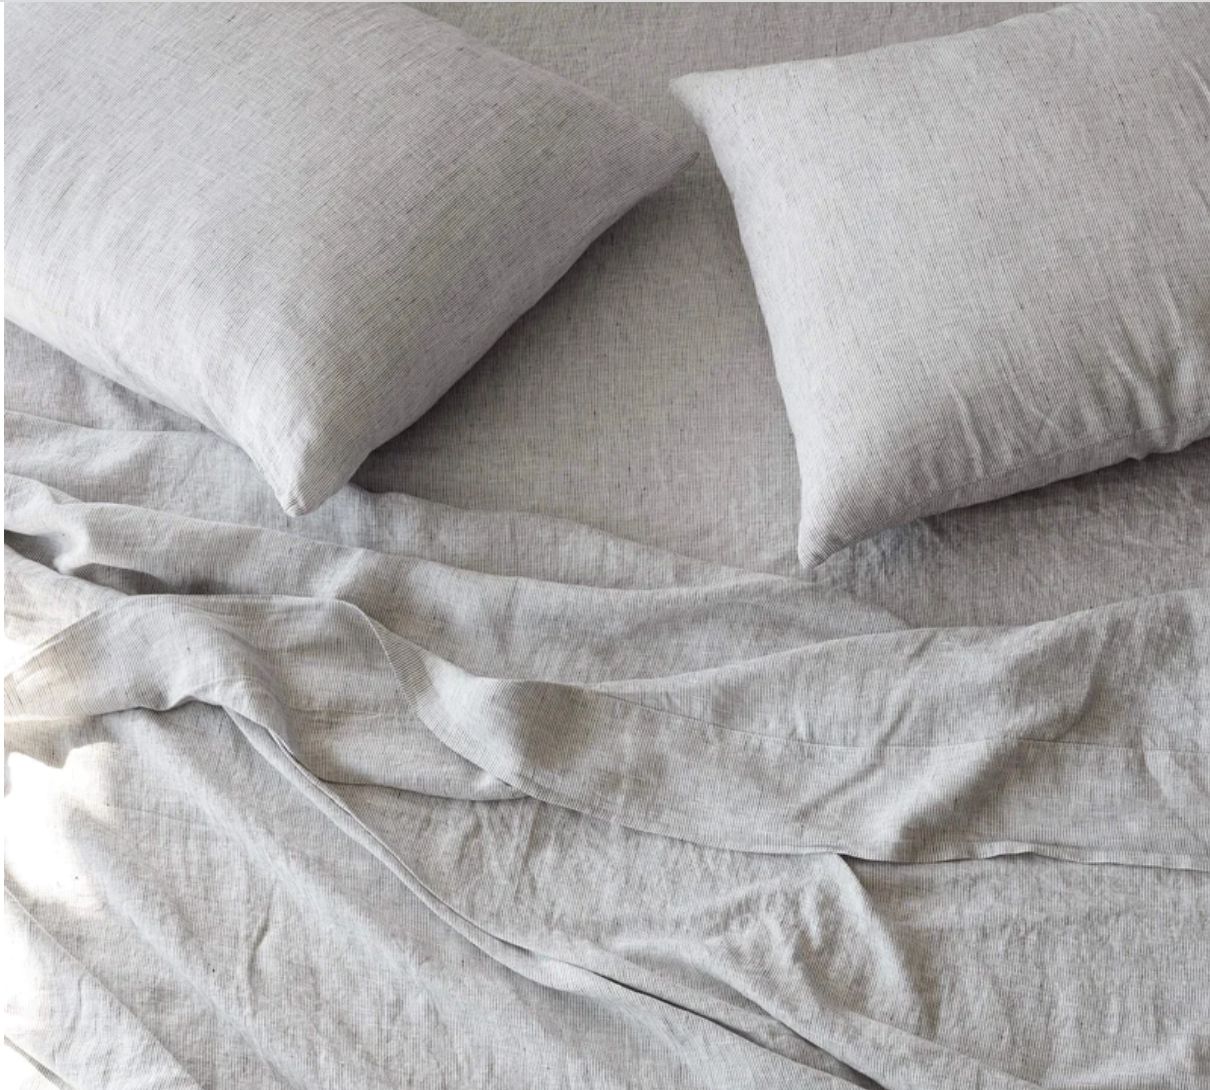 Neutral-toned bedding with pillows